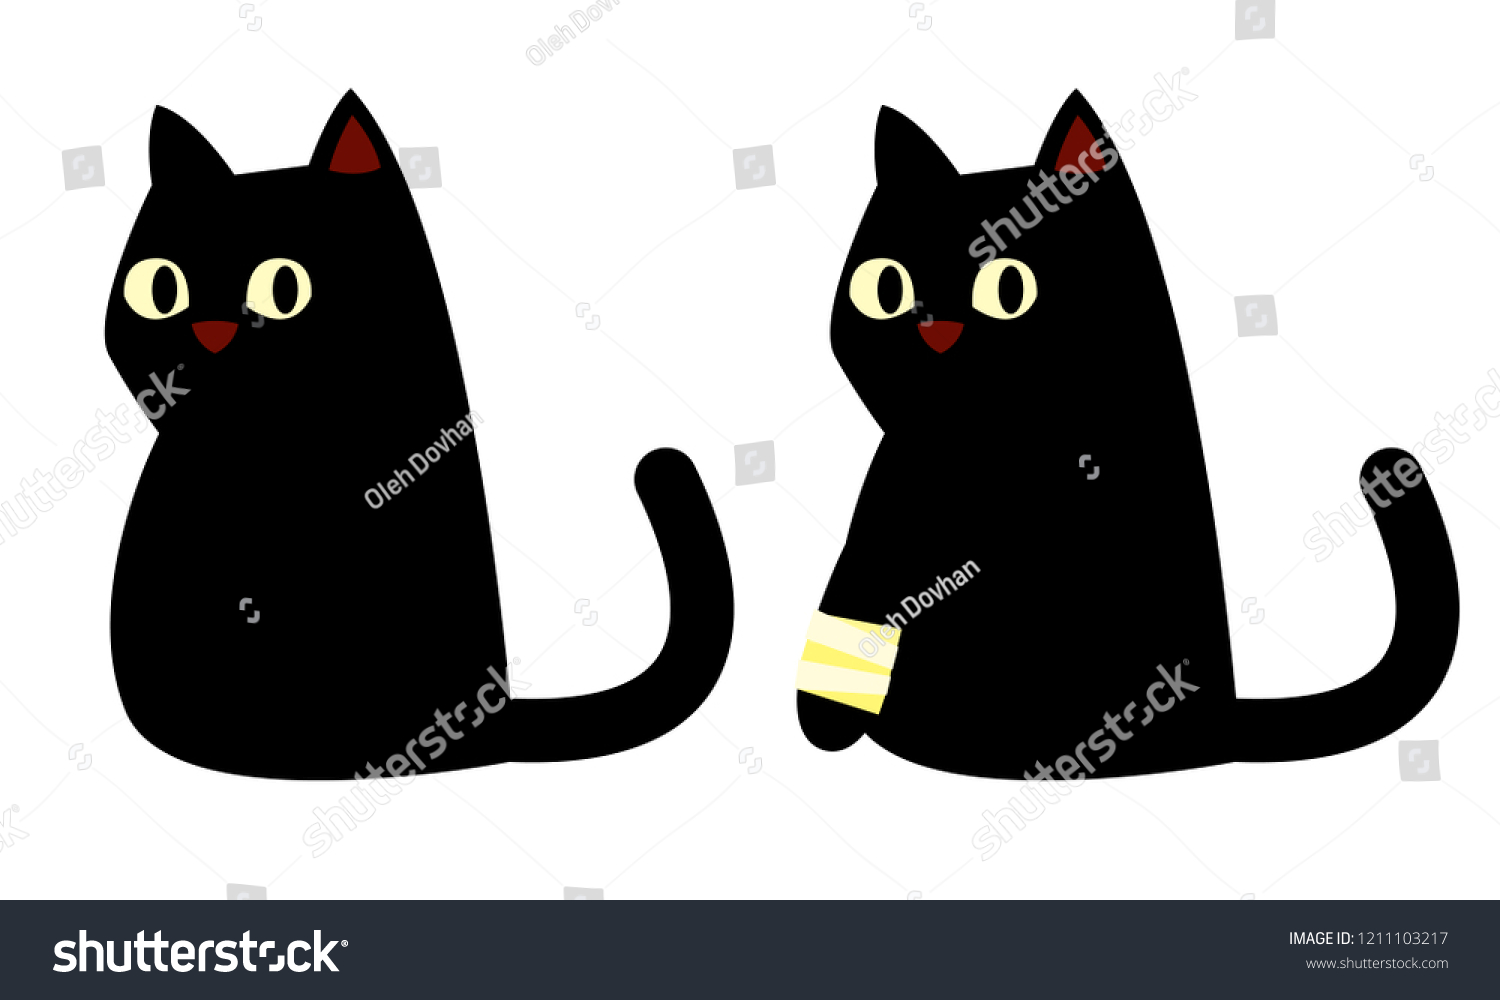 SVG of Cartoon black cat simple and cute kitten silhouette. Healthy cat and cat with broken paw svg